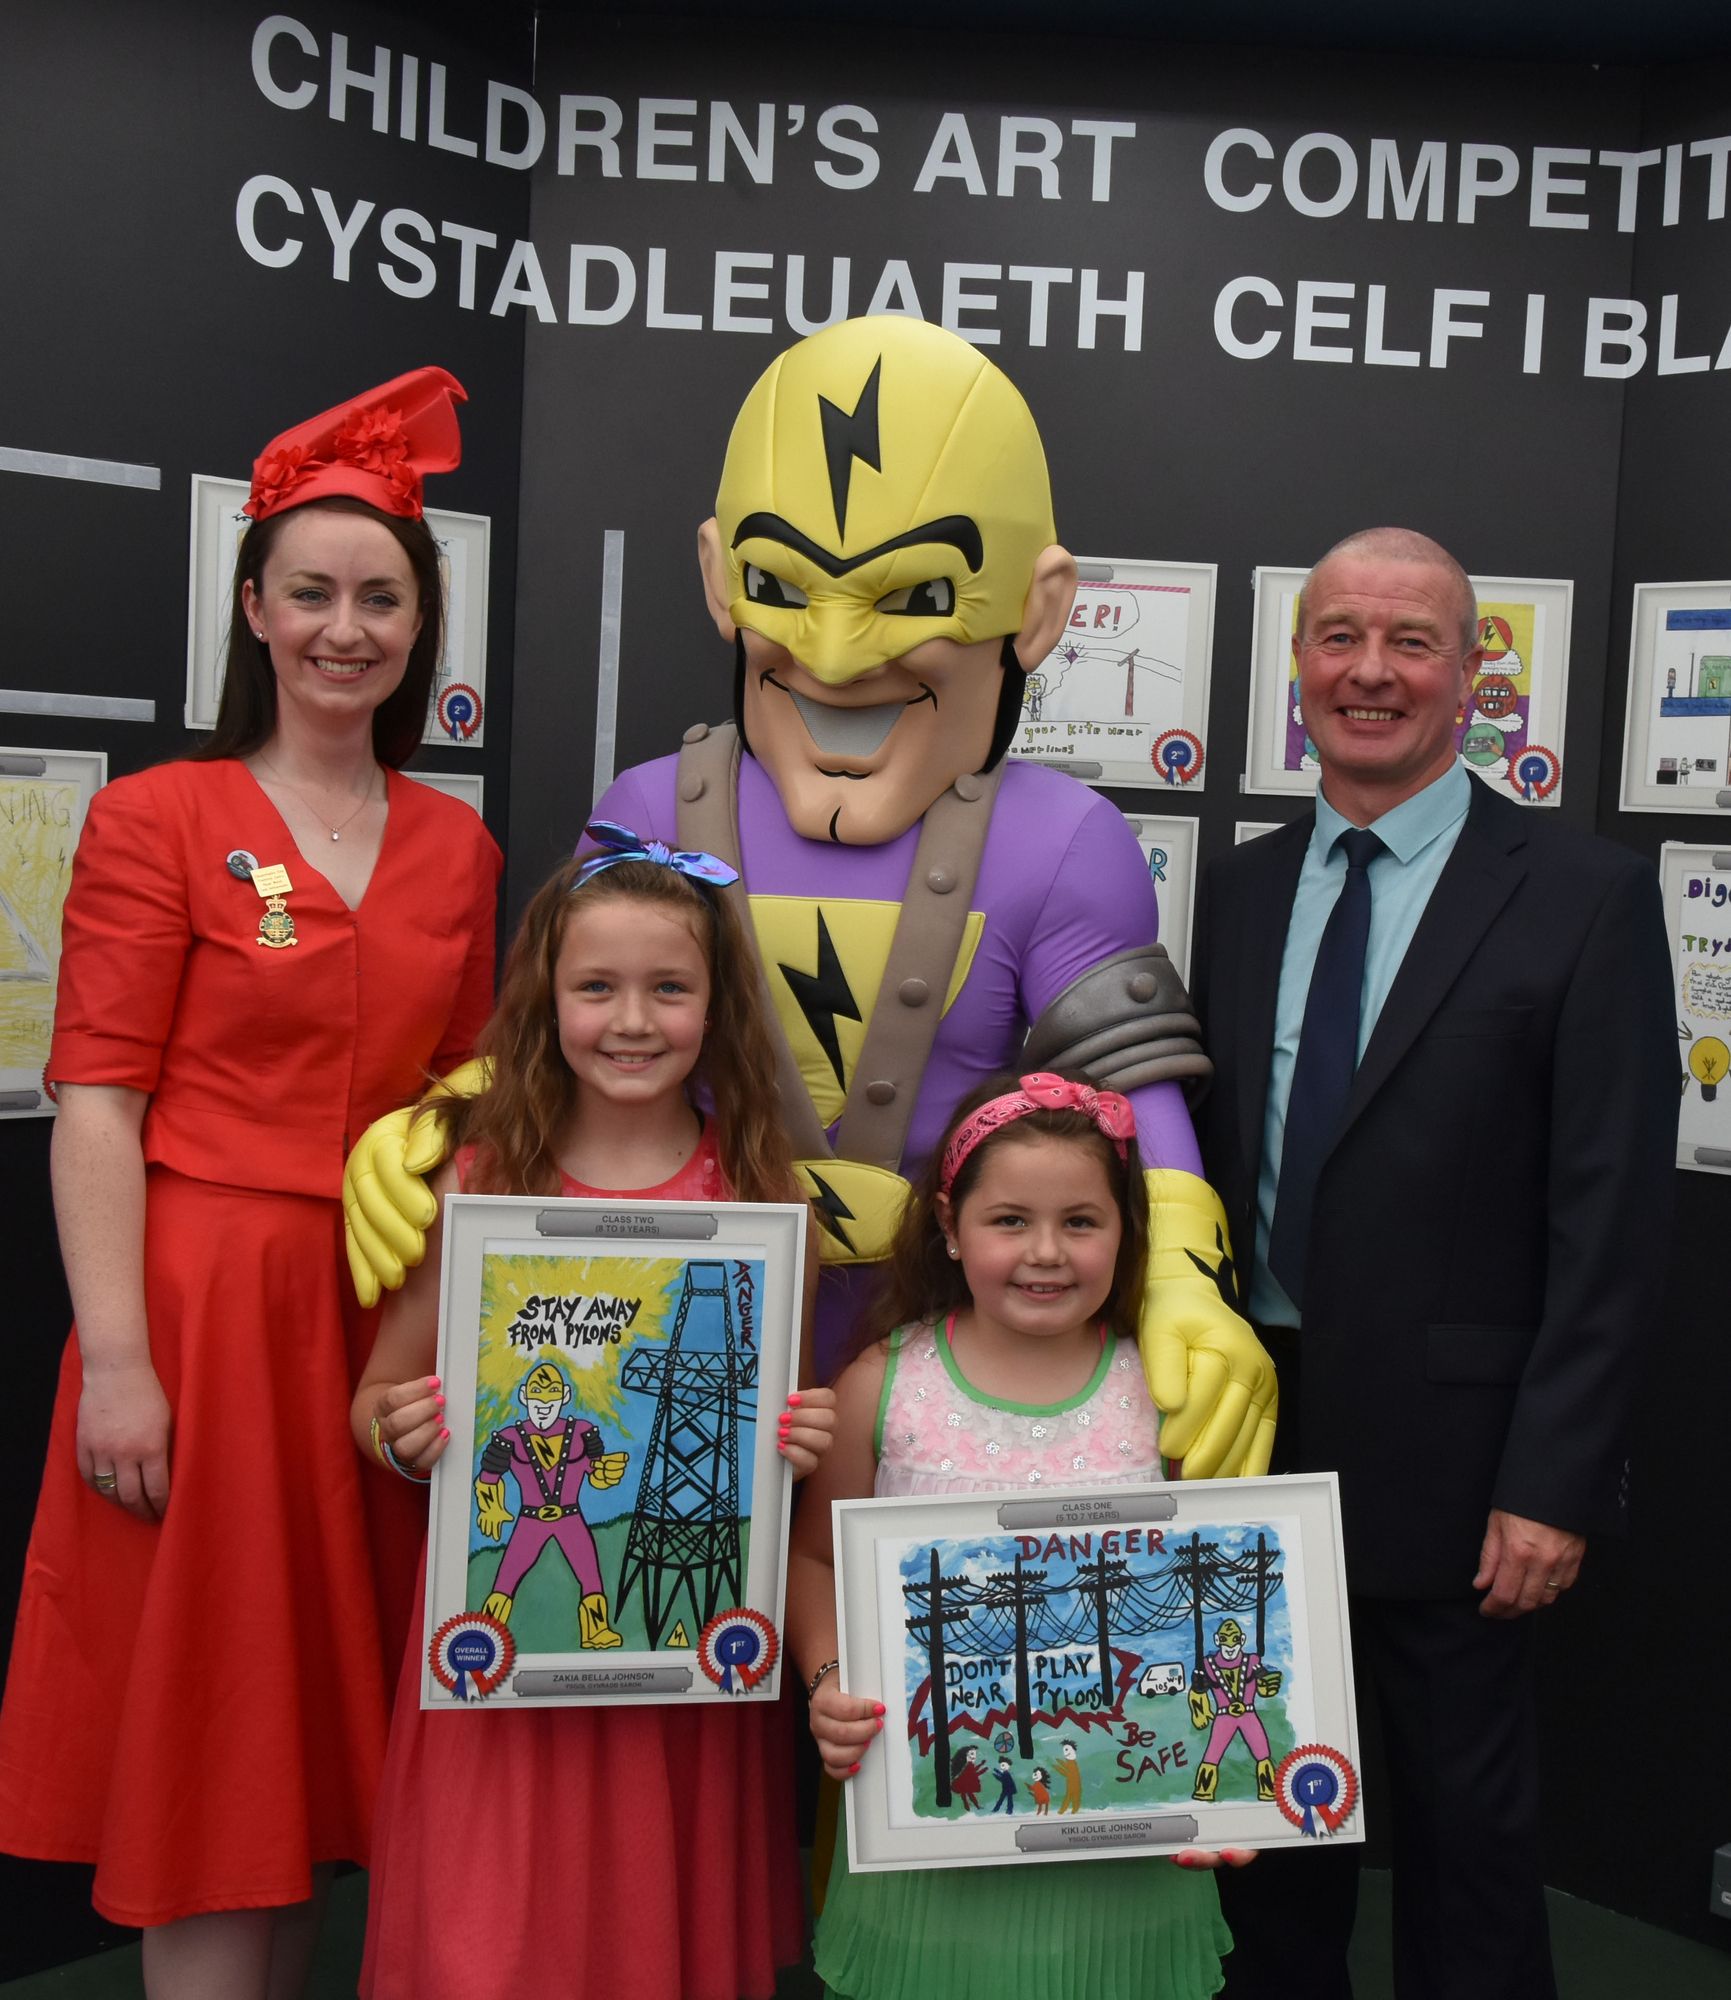 Western Power mascot poses with prize winning kids